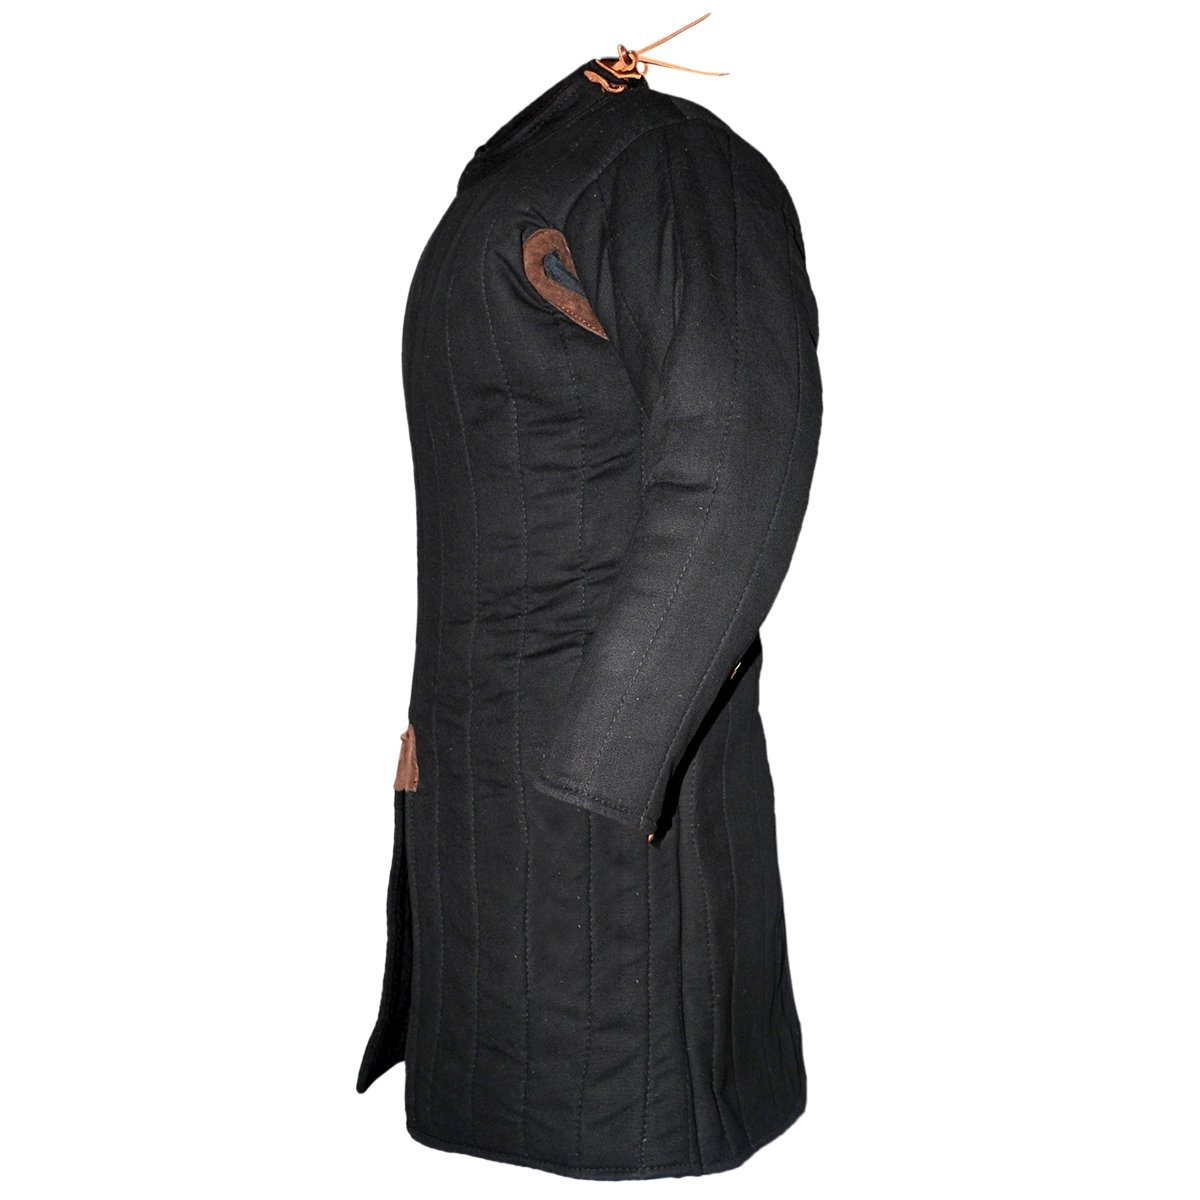 Closed Gambeson Late 12th C./Early 13th C., Black Size XL